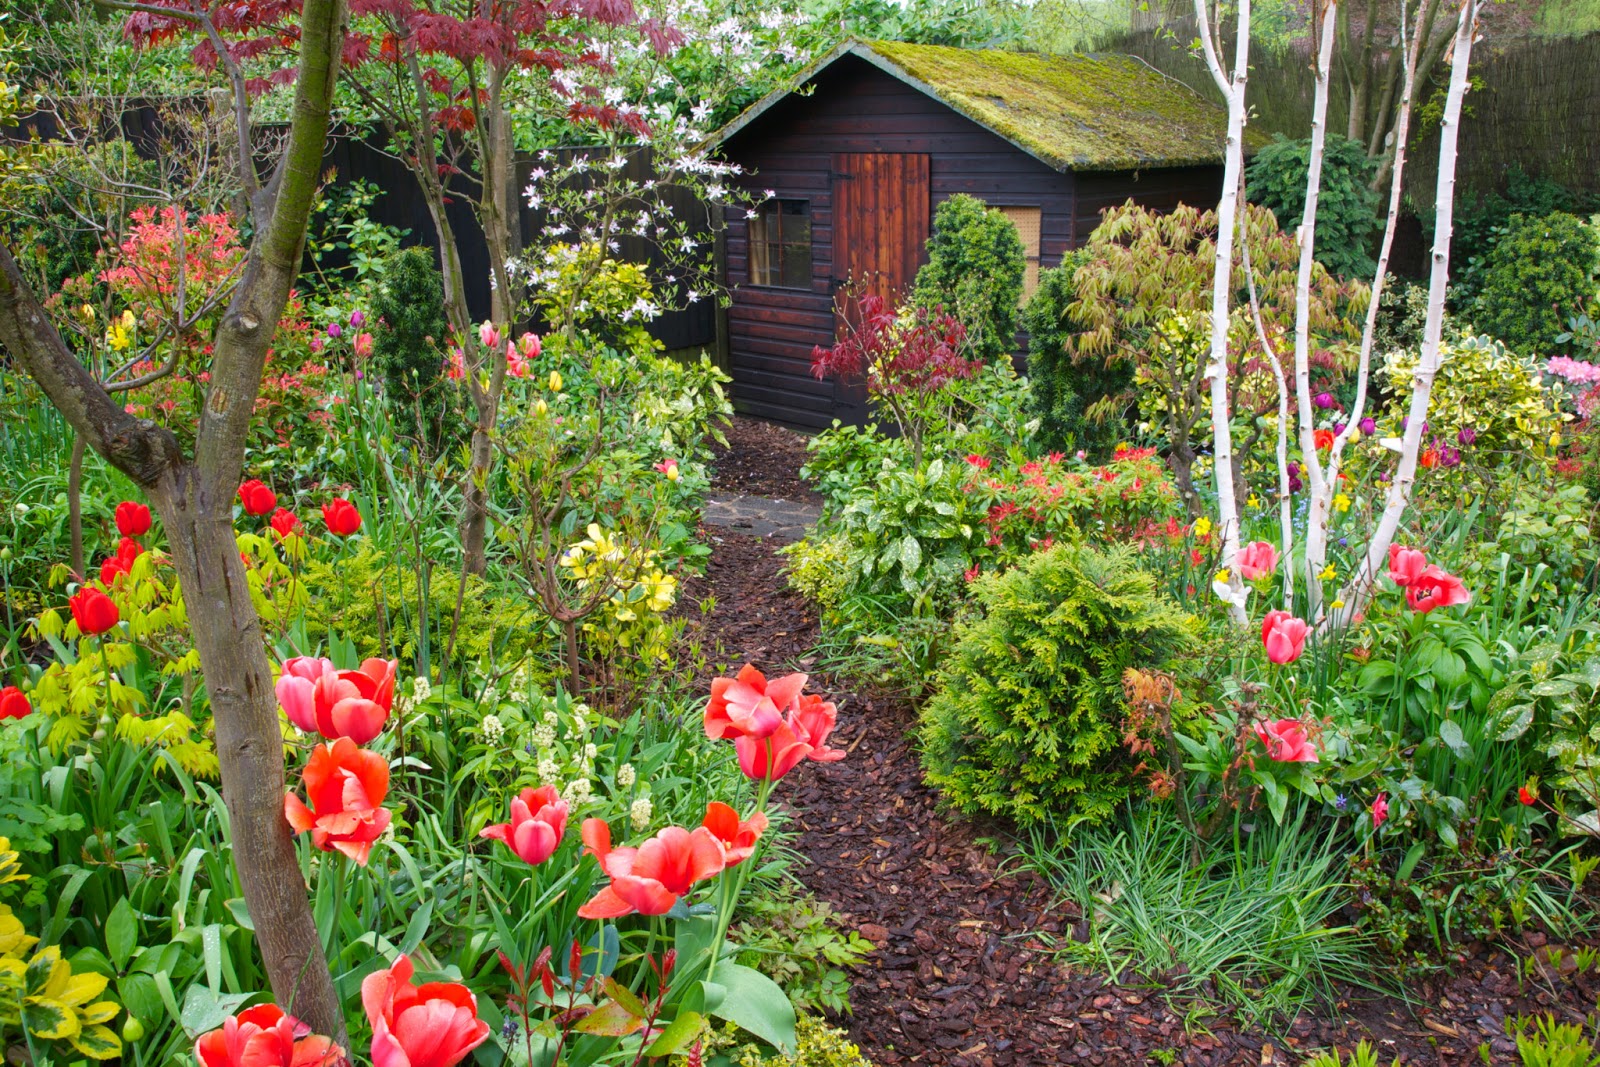 Our+garden+shed+in+spring.jpg